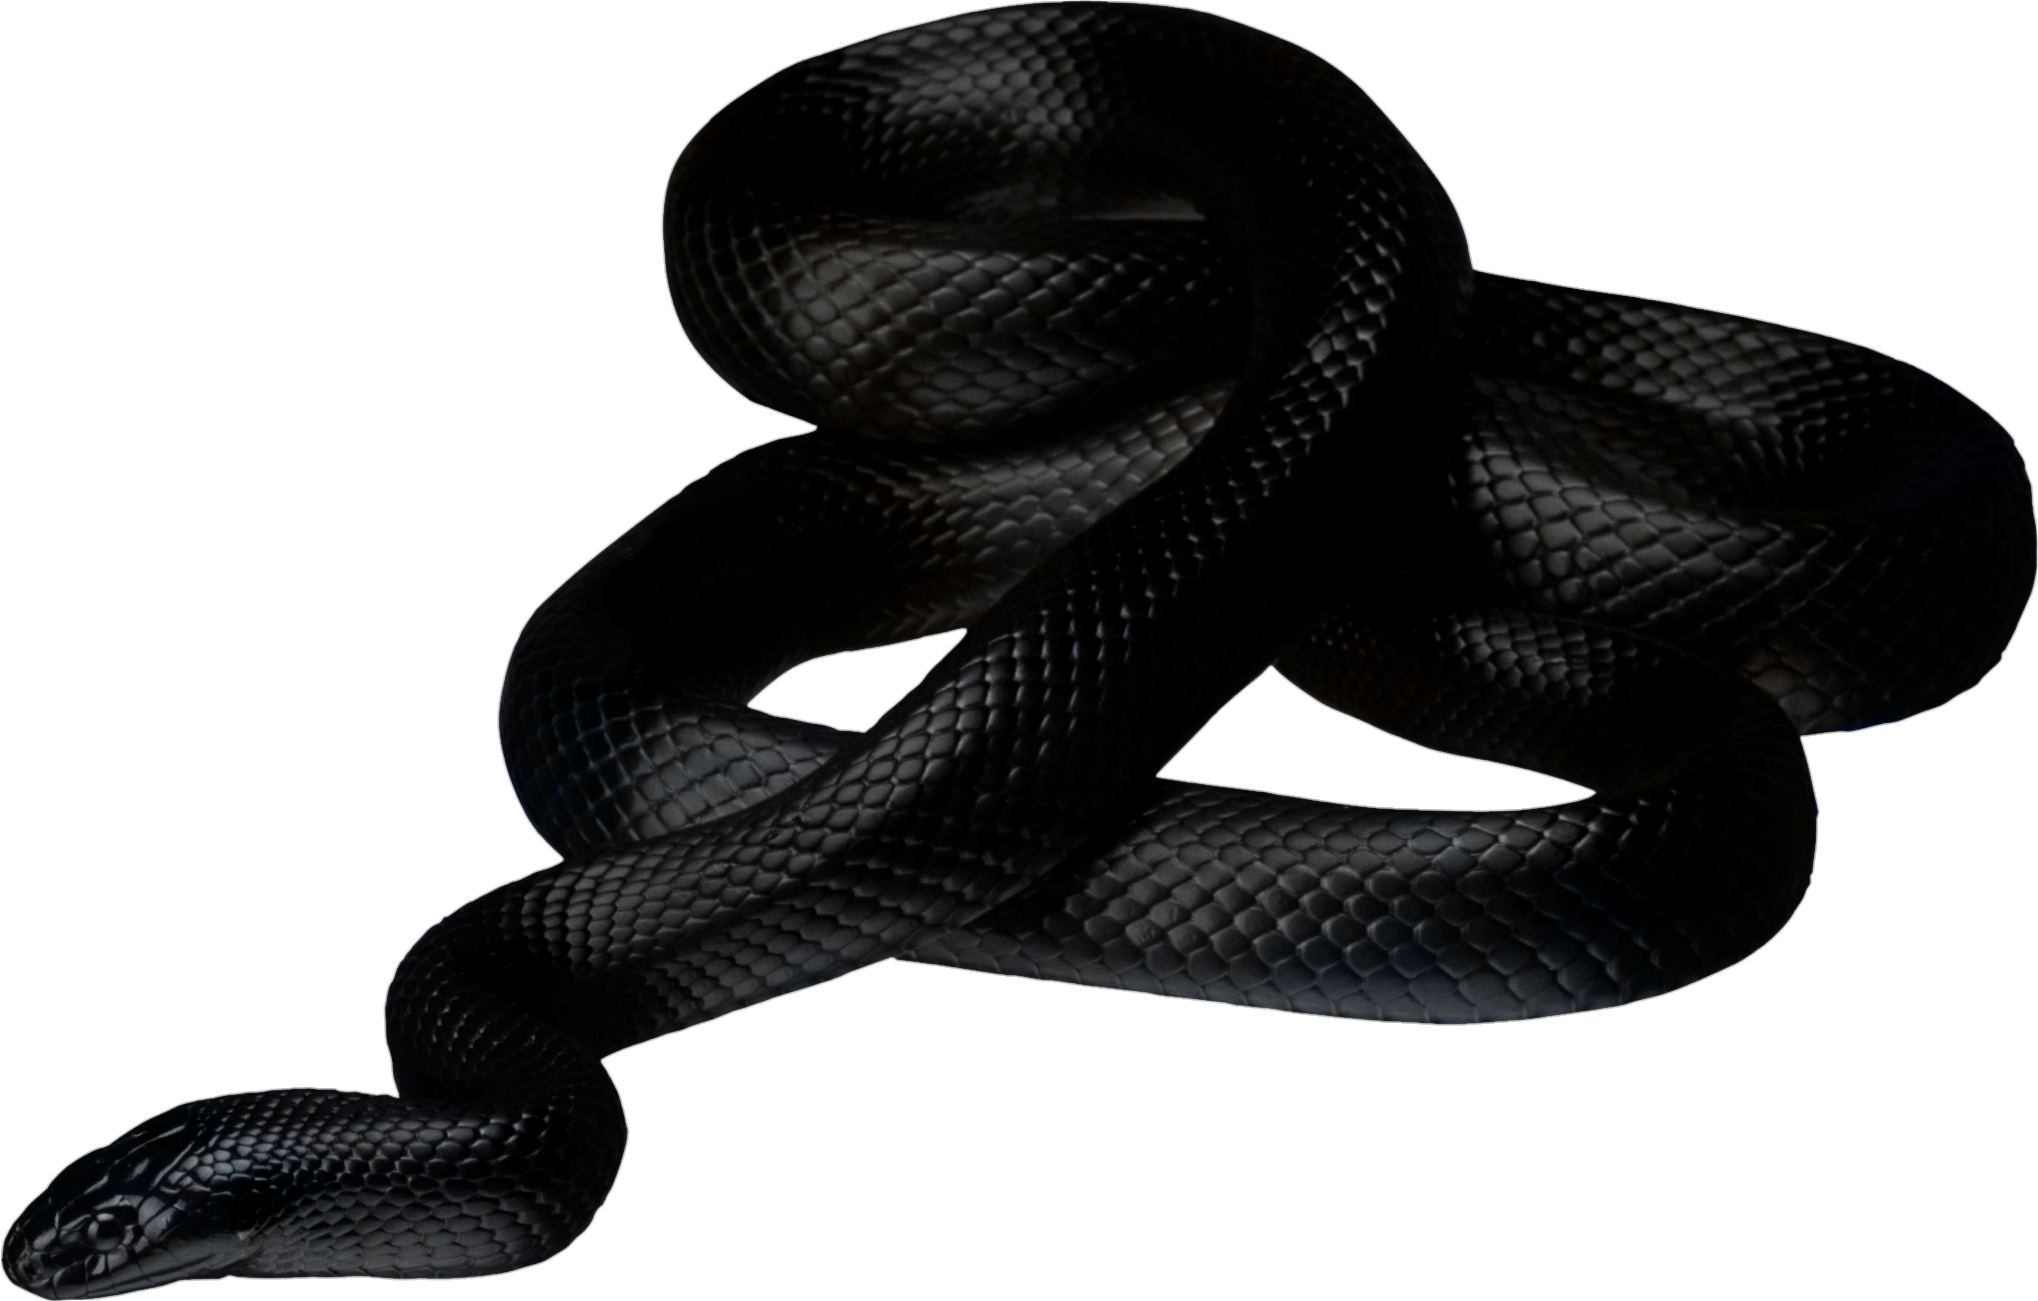 snake-png-image-pngfre-7